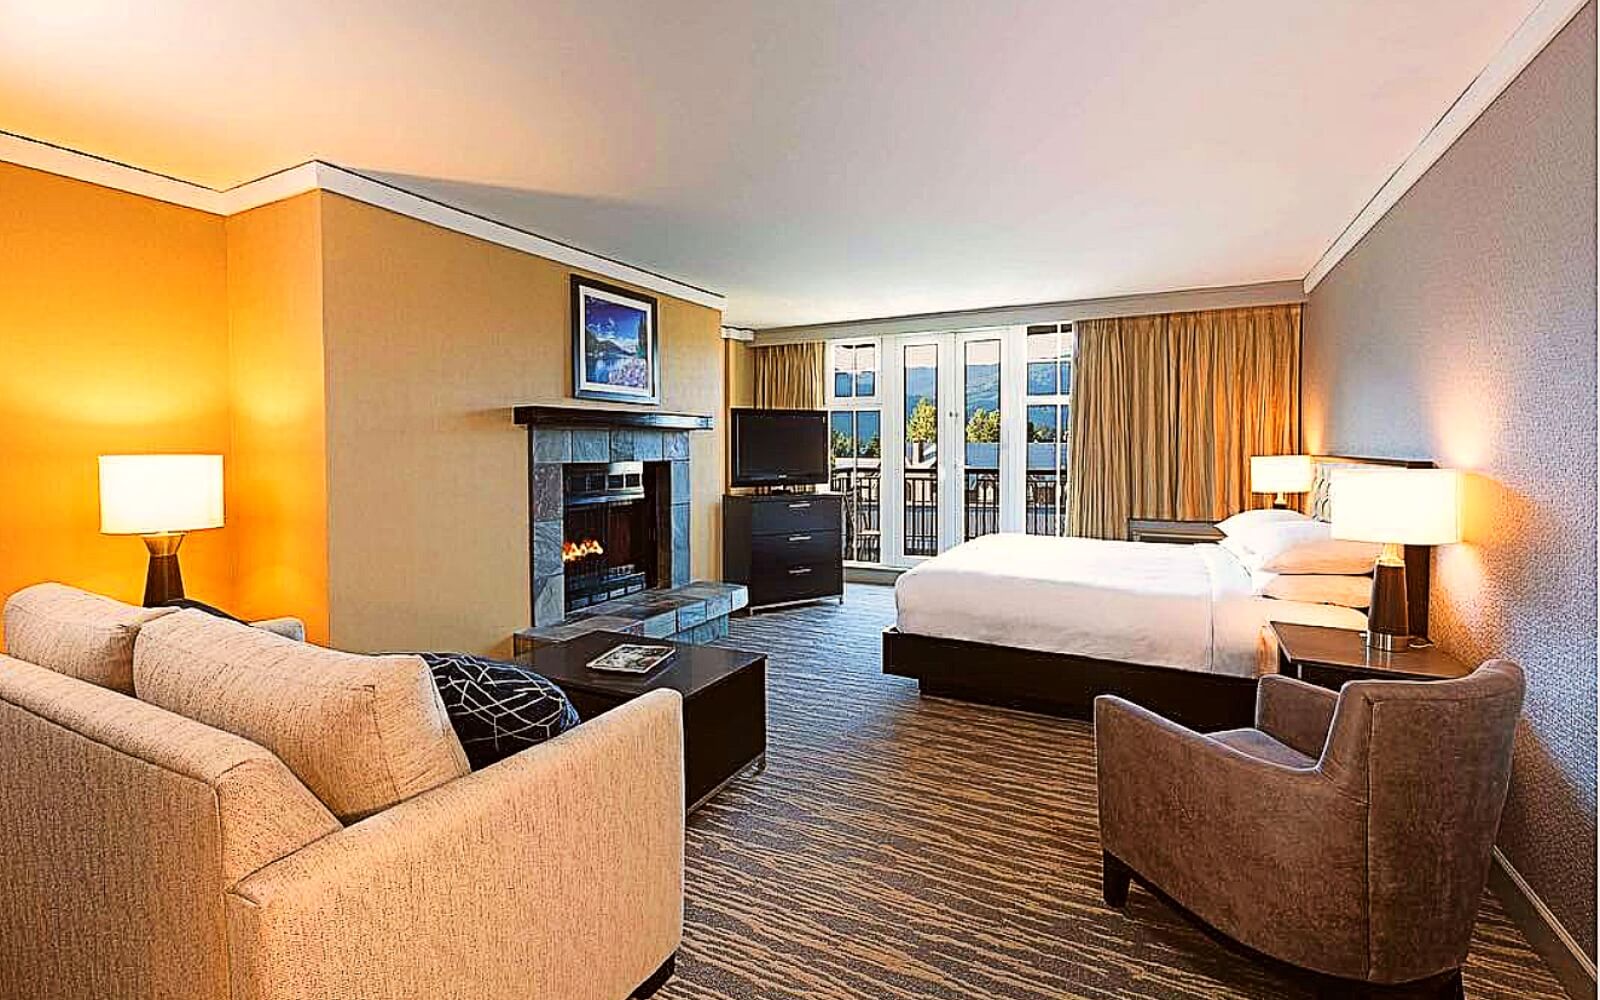 A room at the Hilton Resort and Spa, Whistler Village